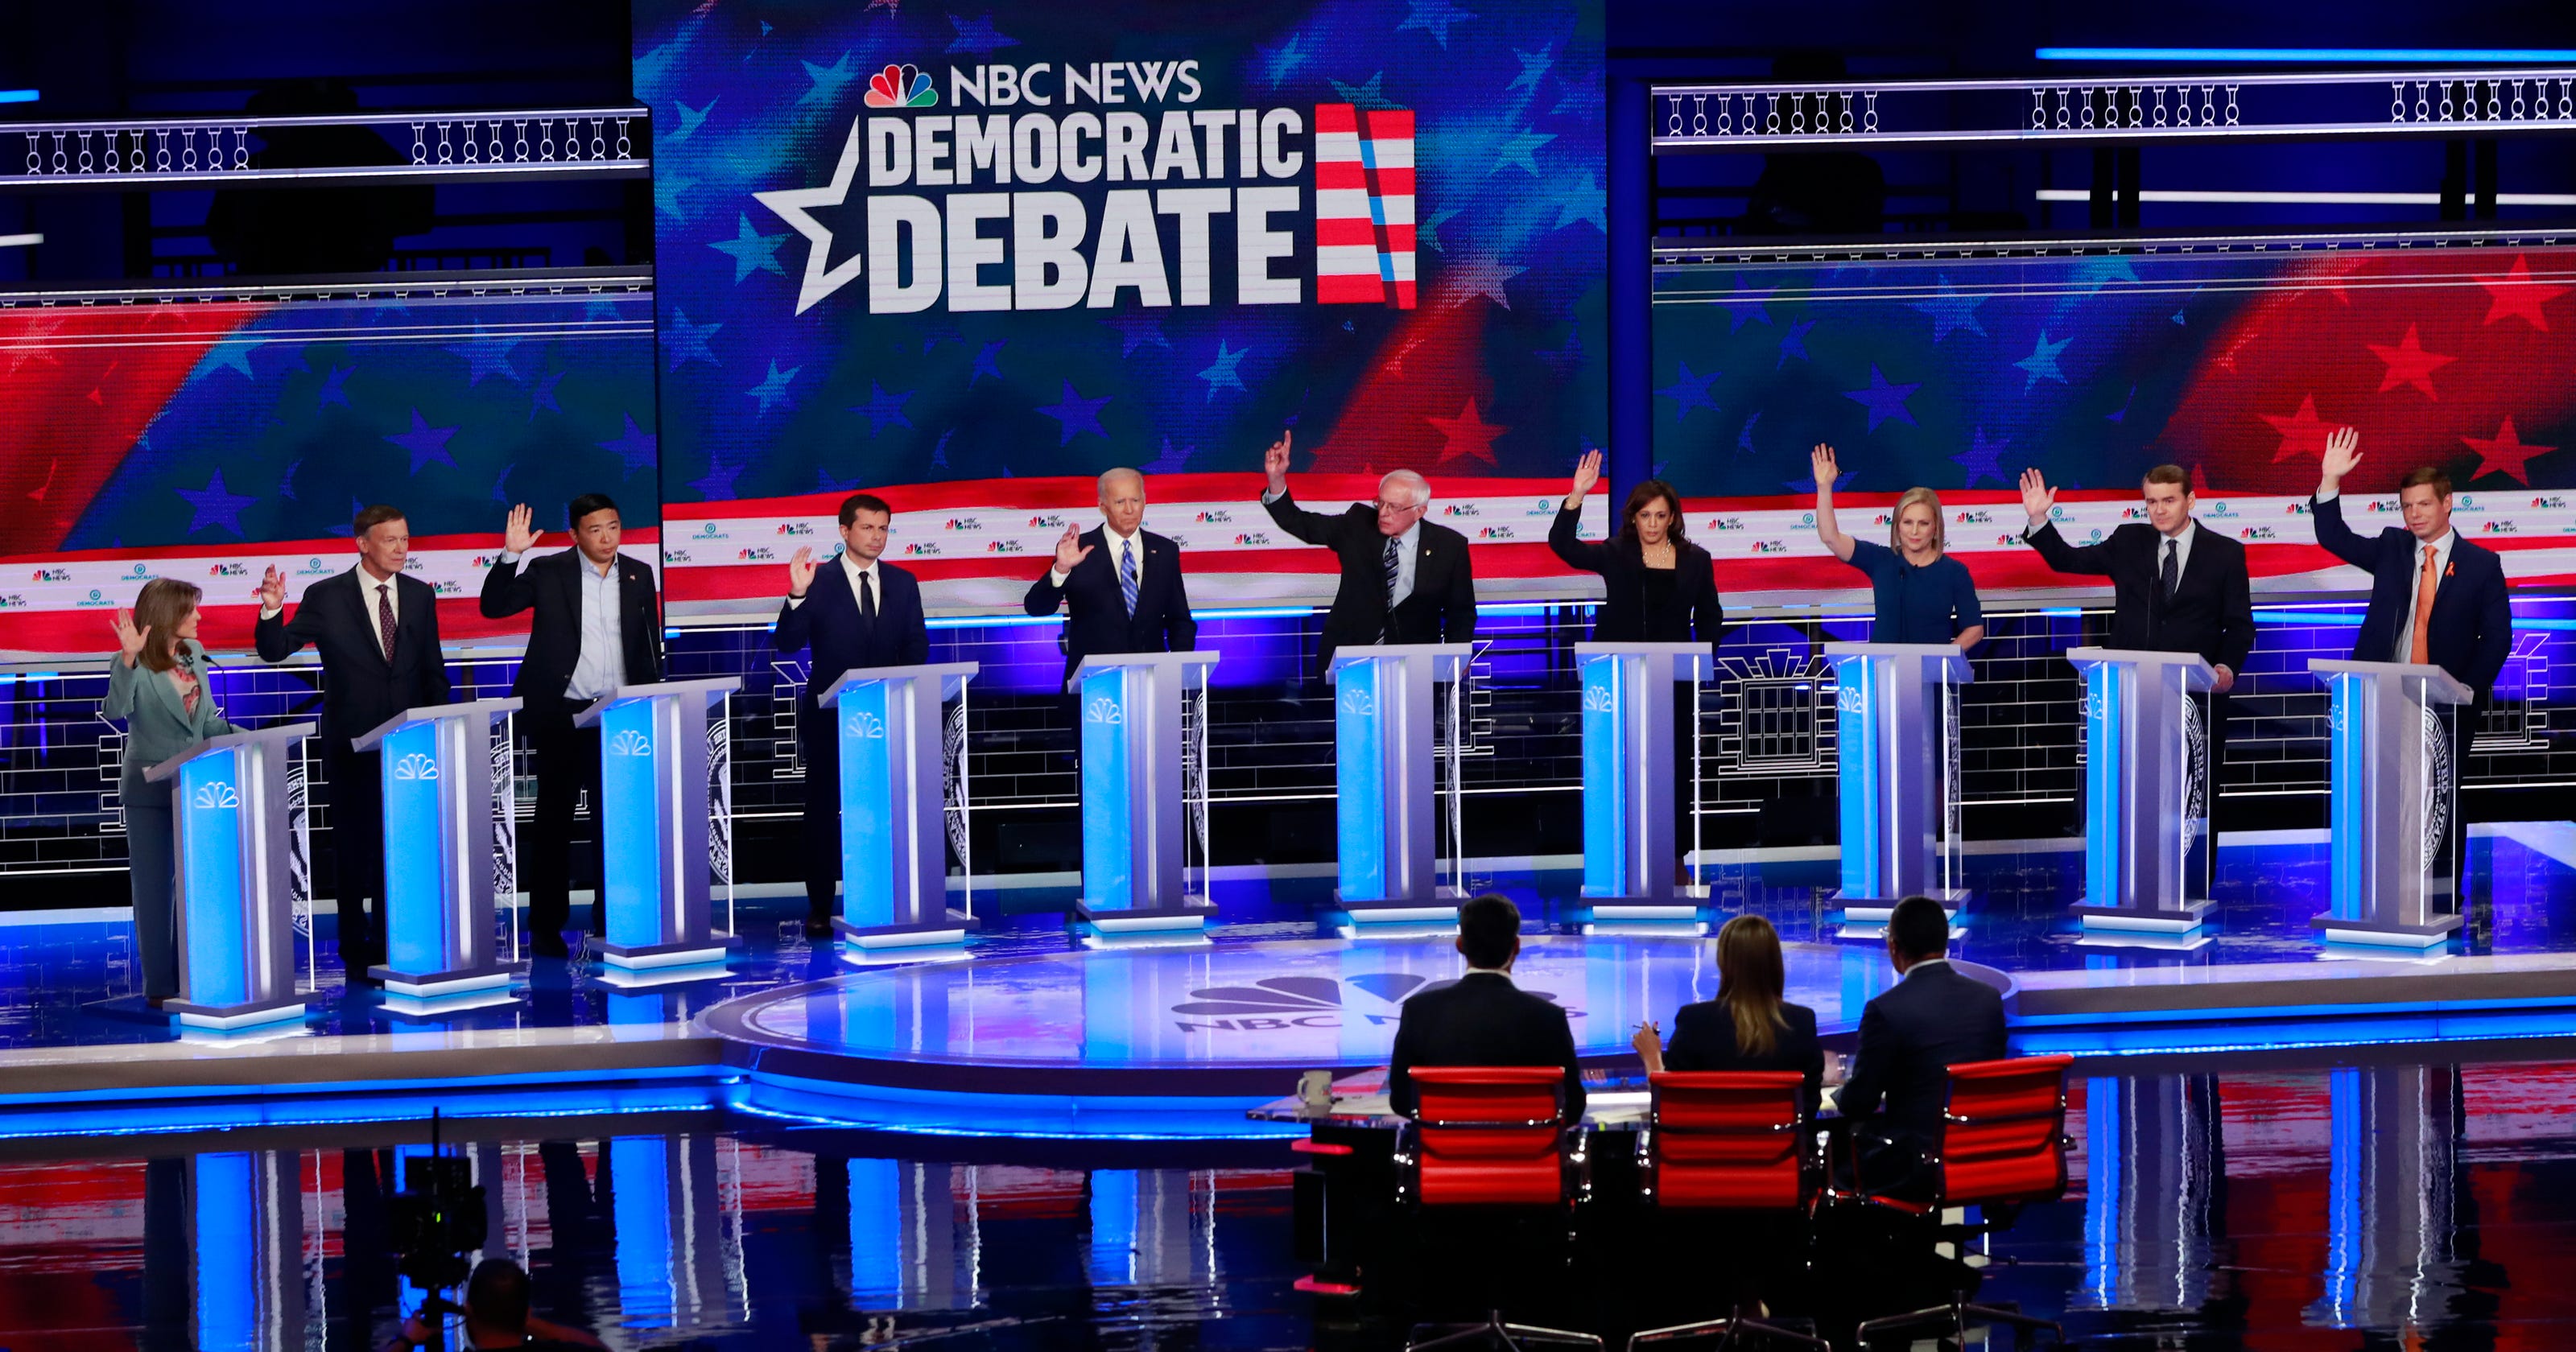 See the lineups CNN picked for the Detroit Democratic debates